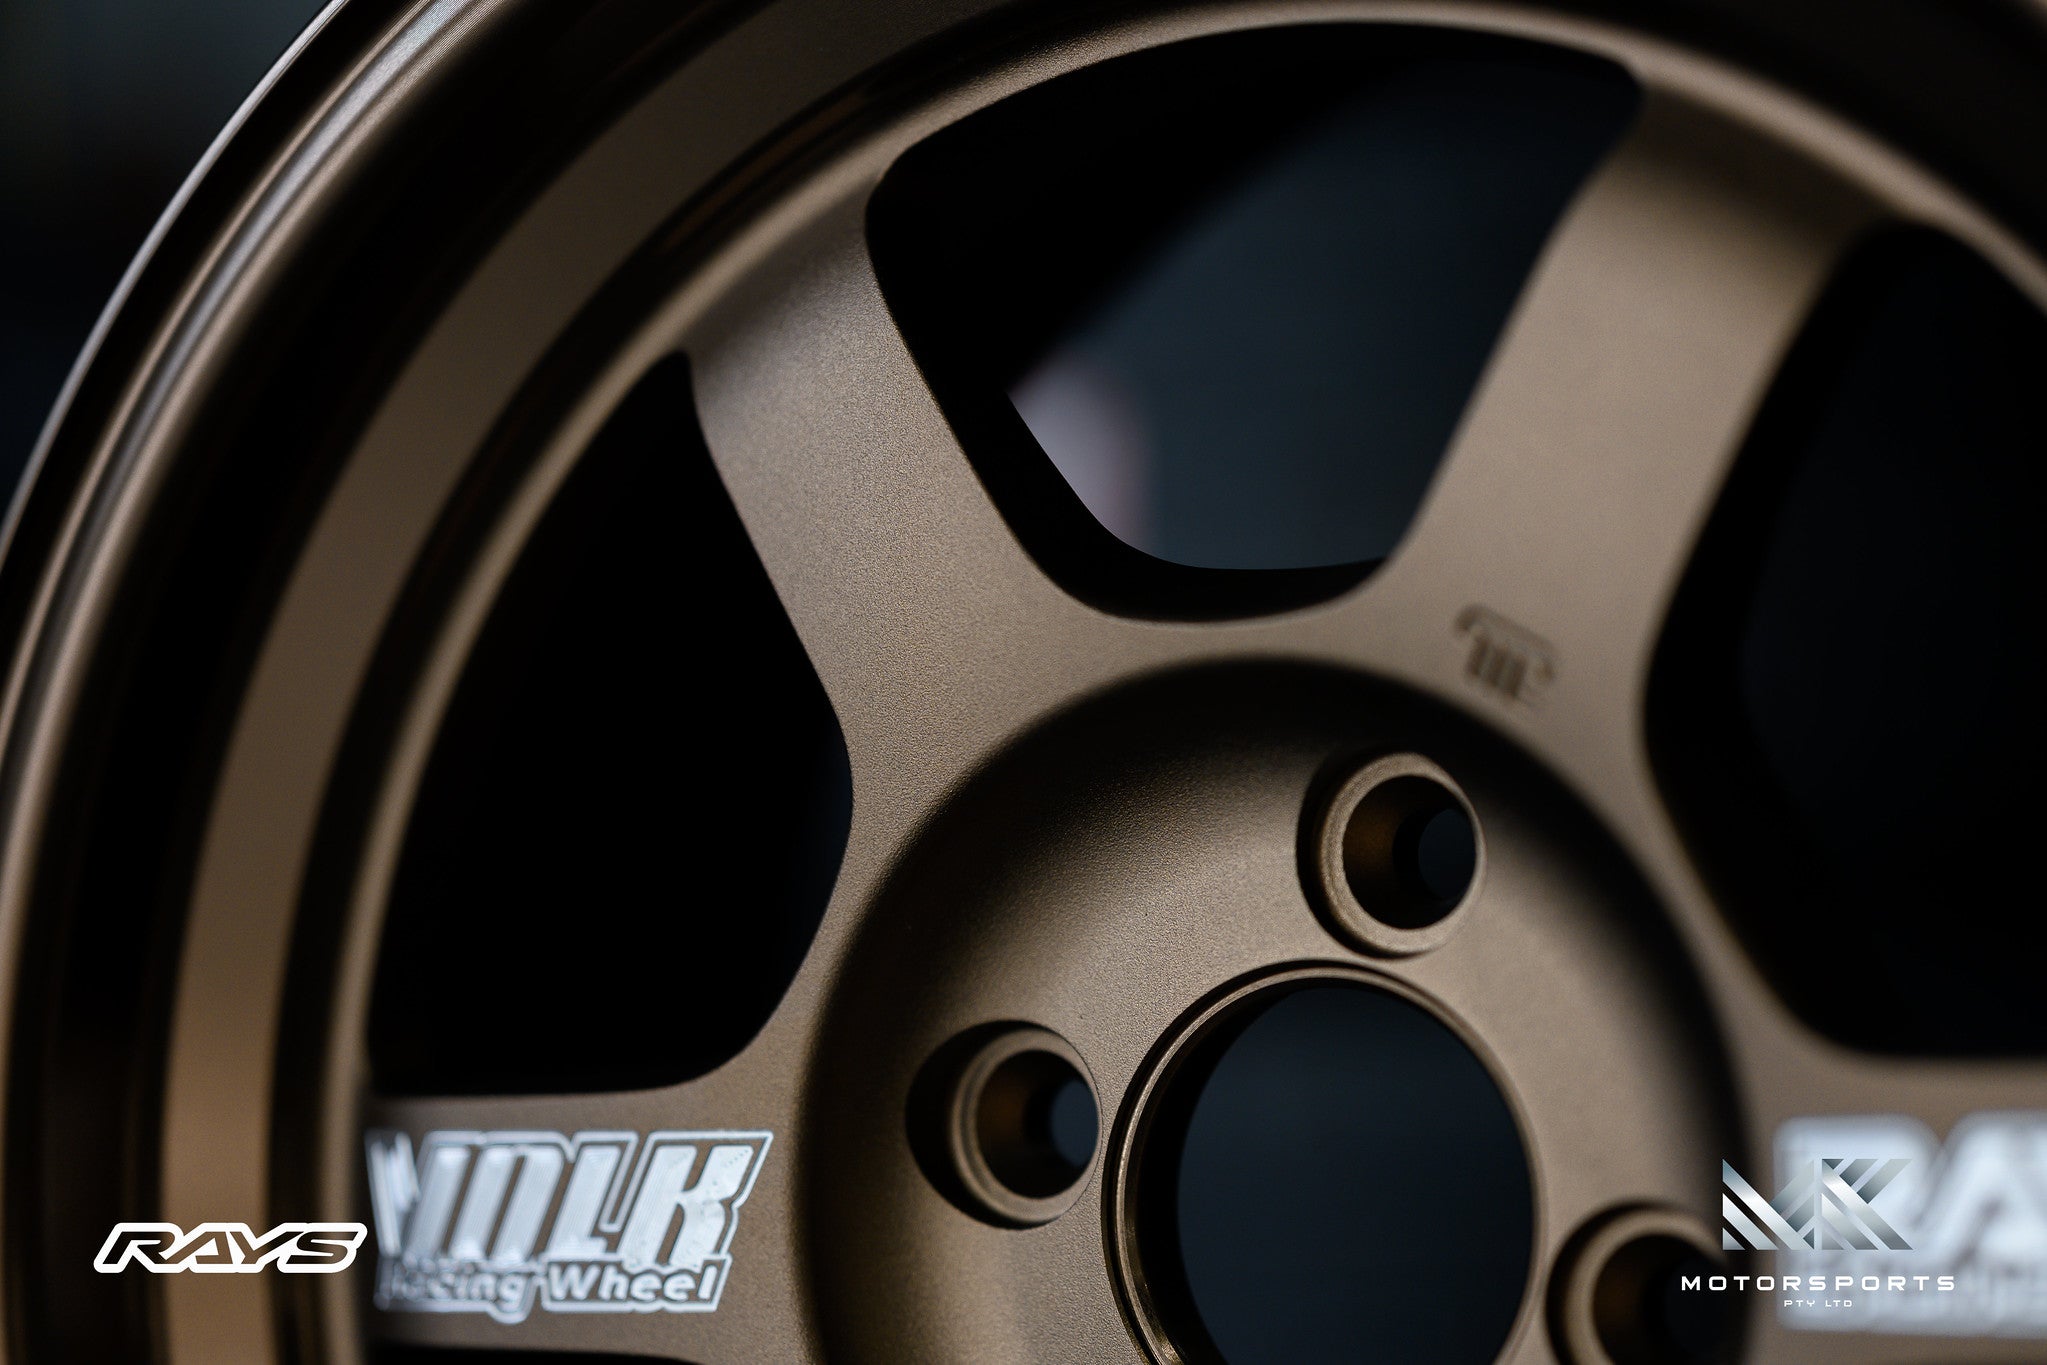 Volk Racing TE37V 10th Anniversary Edition 17" - Premium Wheels from Volk Racing - From just $3690.00! Shop now at MK MOTORSPORTS